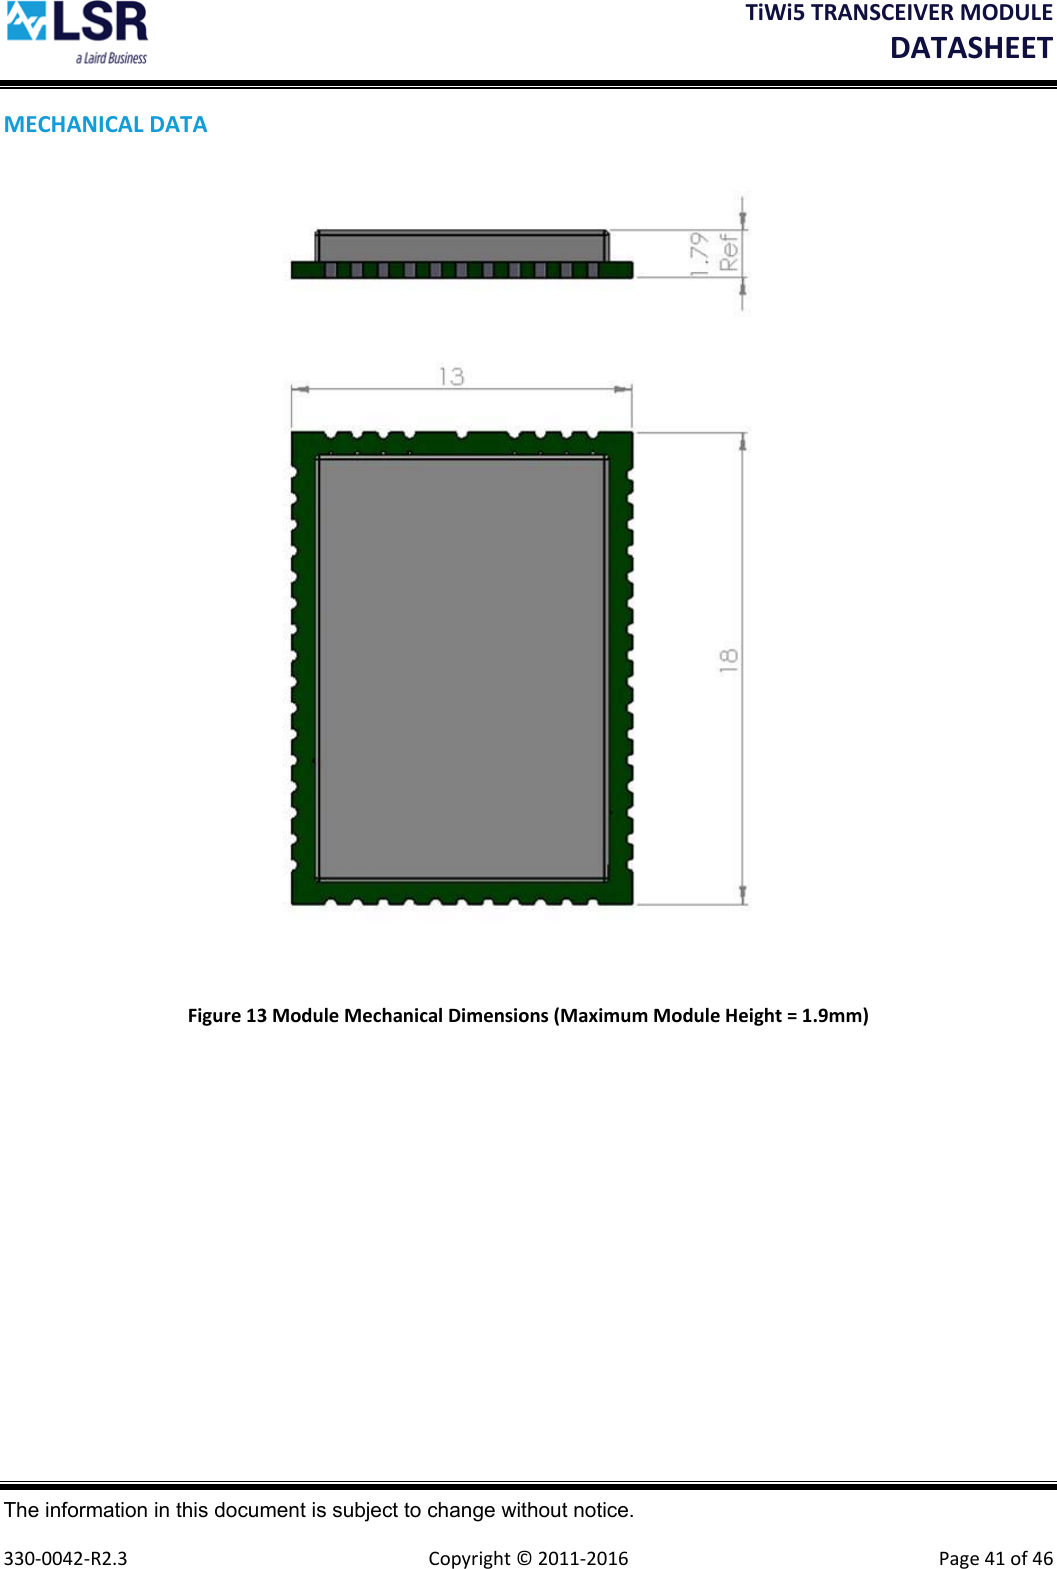 TiWi5TRANSCEIVERMODULEDATASHEET The information in this document is subject to change without notice.  330‐0042‐R2.3  Copyright©2011‐2016 Page41of46MECHANICALDATAFigure13ModuleMechanicalDimensions(MaximumModuleHeight=1.9mm)